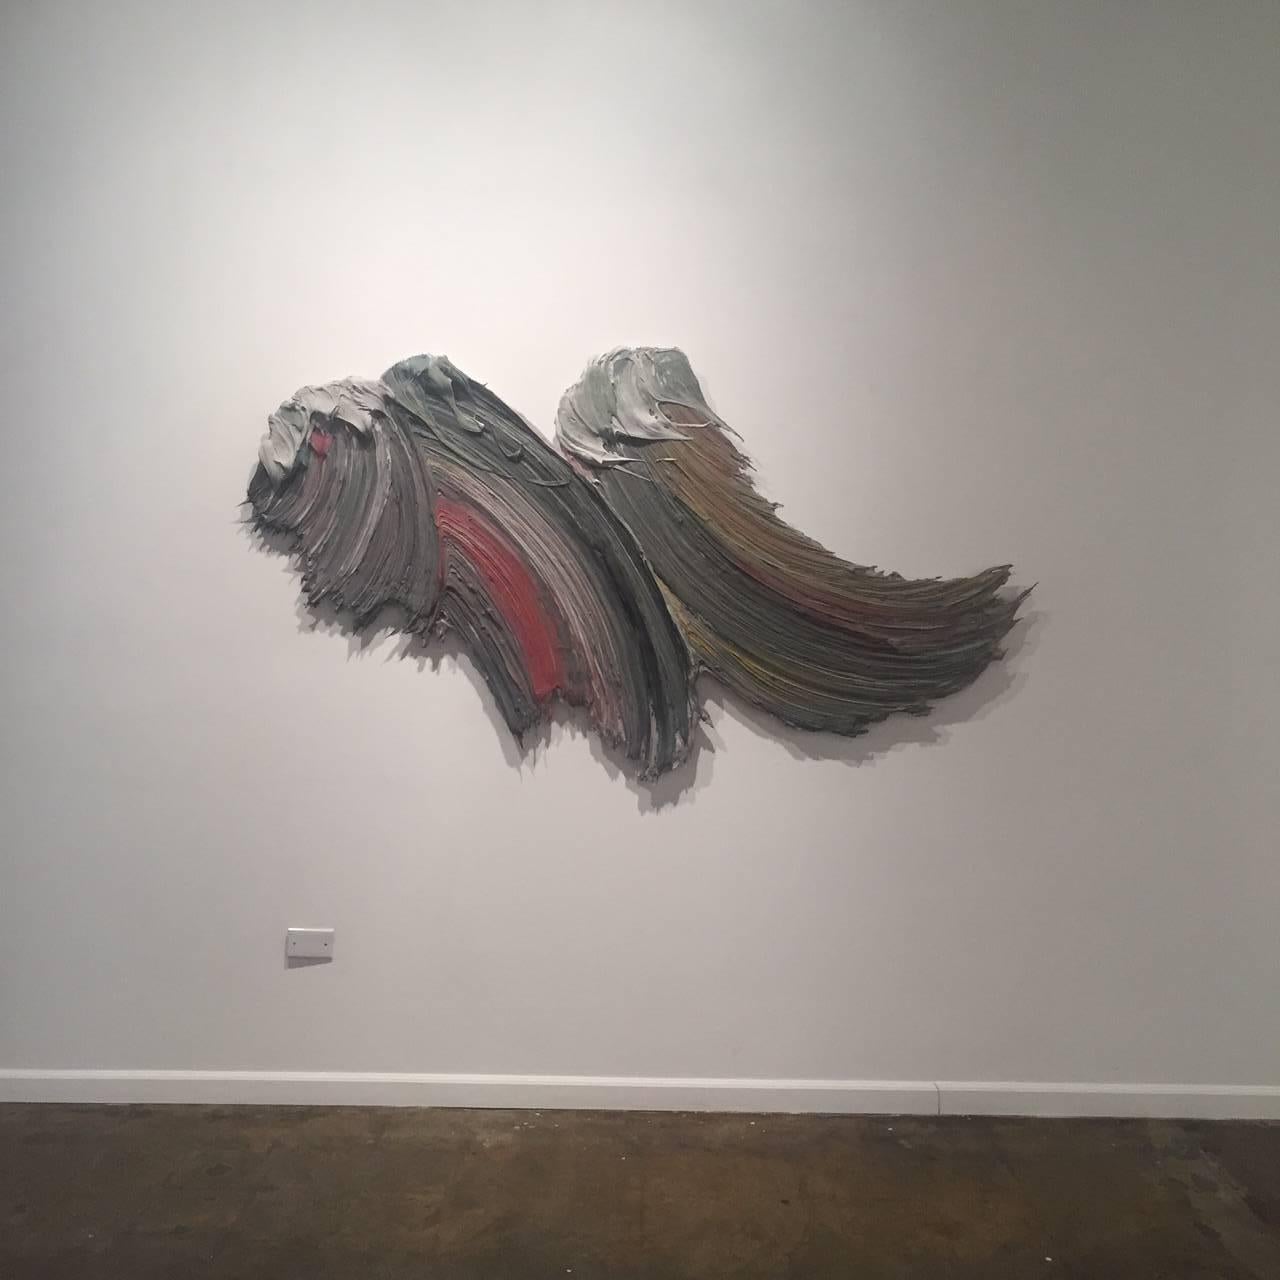 The Painting is the Gesture marks Donald Martiny’s much-anticipated return to Galleri Urbane since his 2013 solo exhibition. Since Martiny's commission to create two large works for the permanent collection at One World Trade Center, he has been